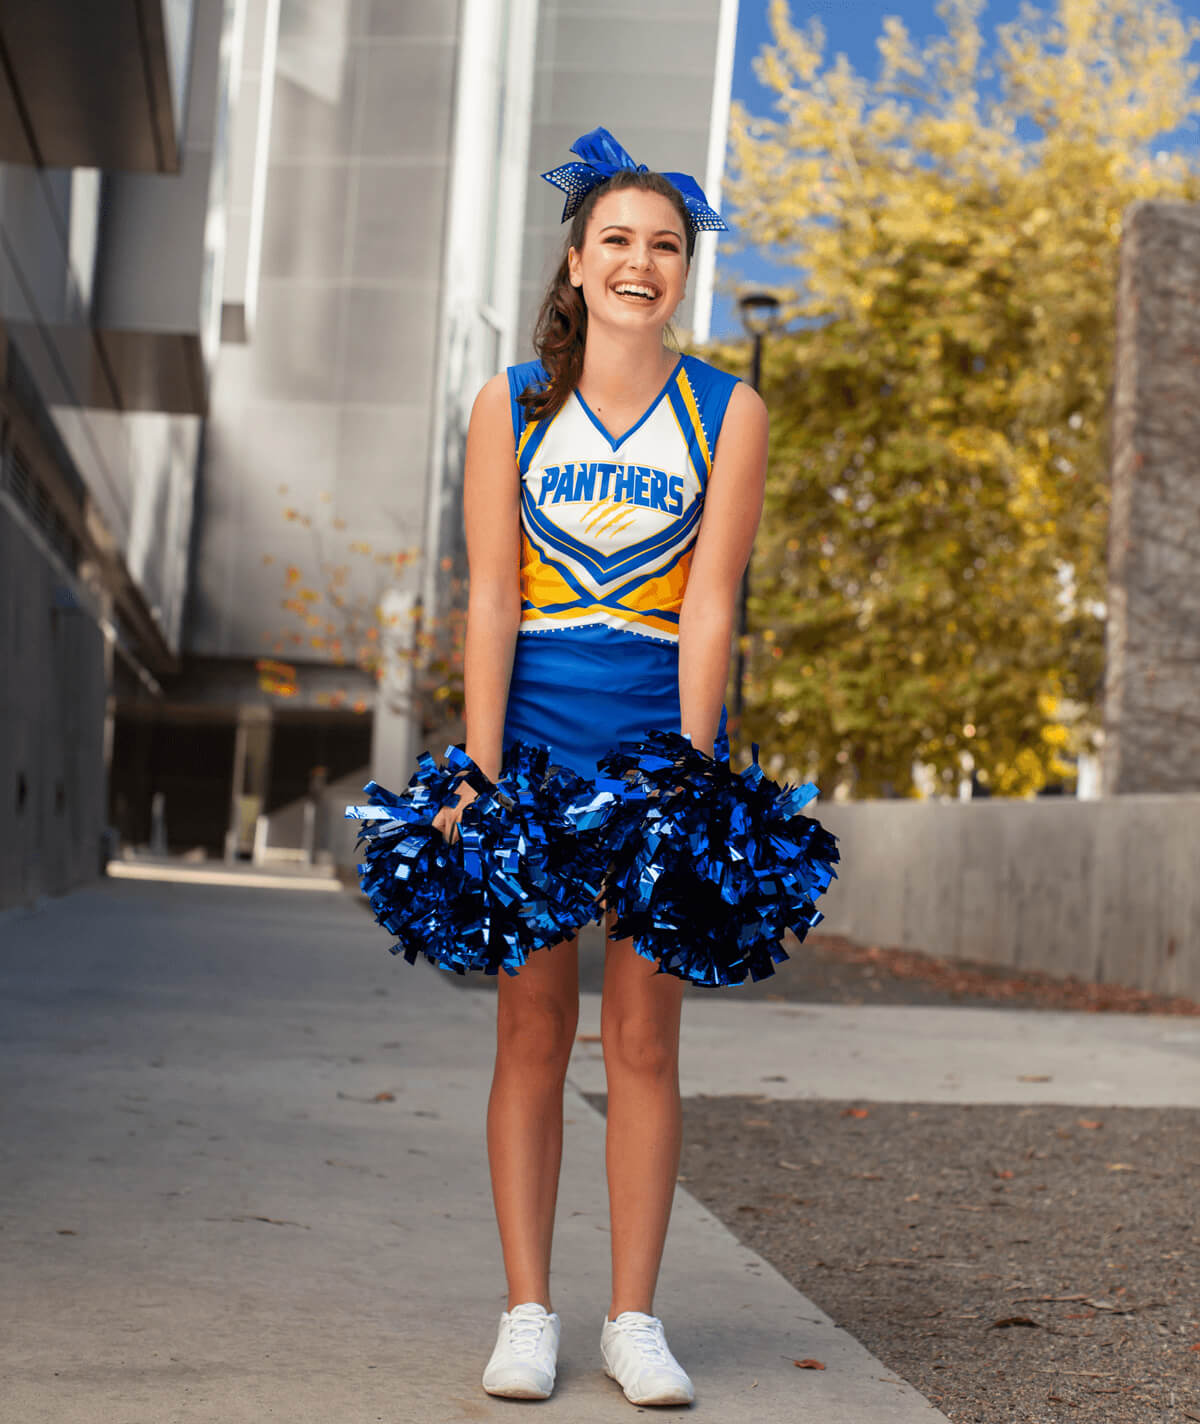 METALLIC Pom Poms SOLD INDIVIDUALLY 19 Colors Cheerleader Pom Pom Cheerleader  Cheer Uniform Cheerleader Girls Adults 